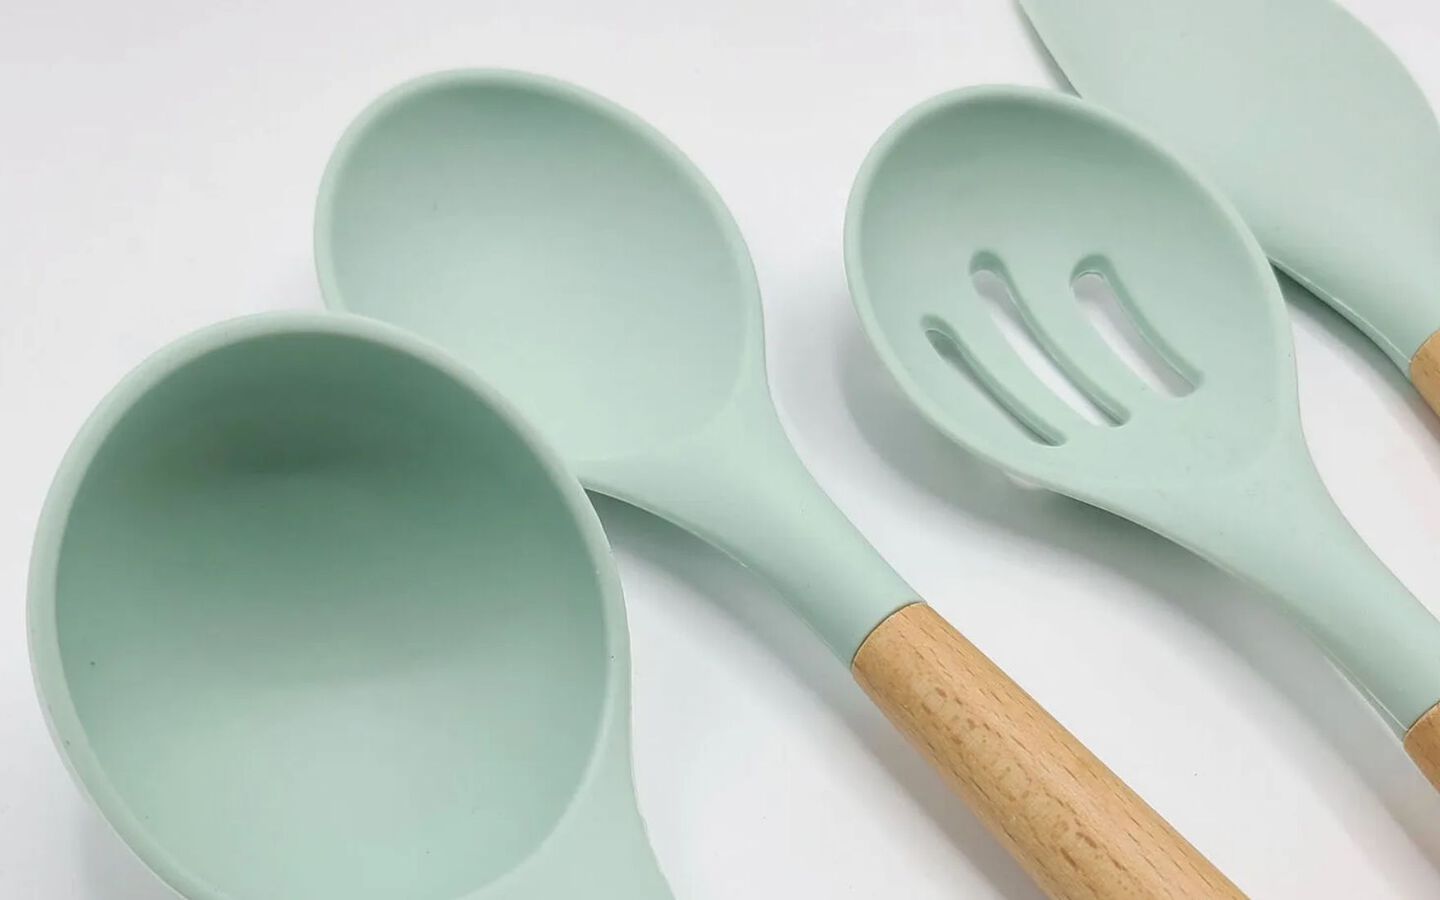 A variety of wooden spoons with mint colored tops